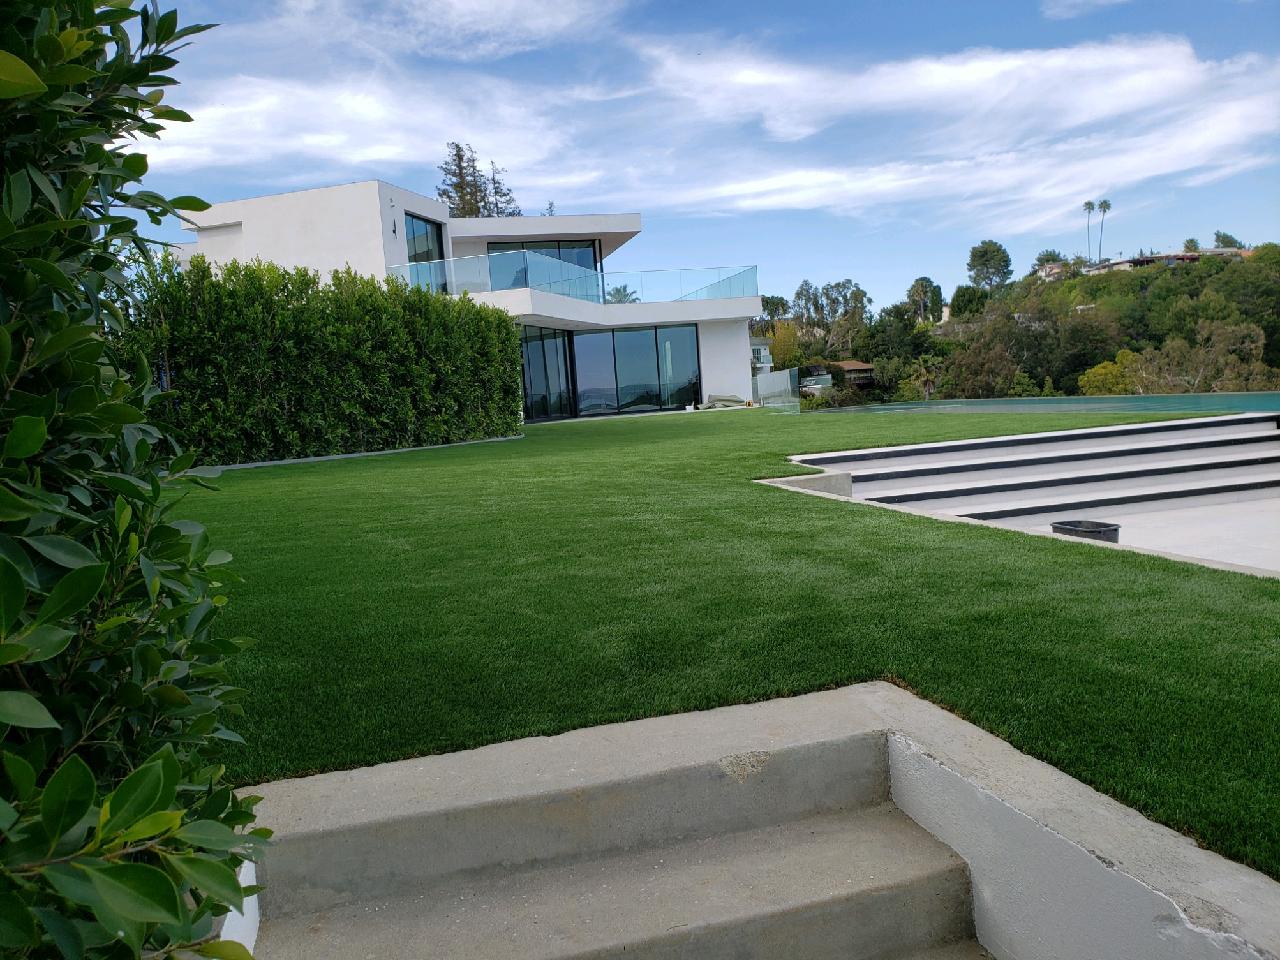 Escondido, CA modern home with landscape turf.